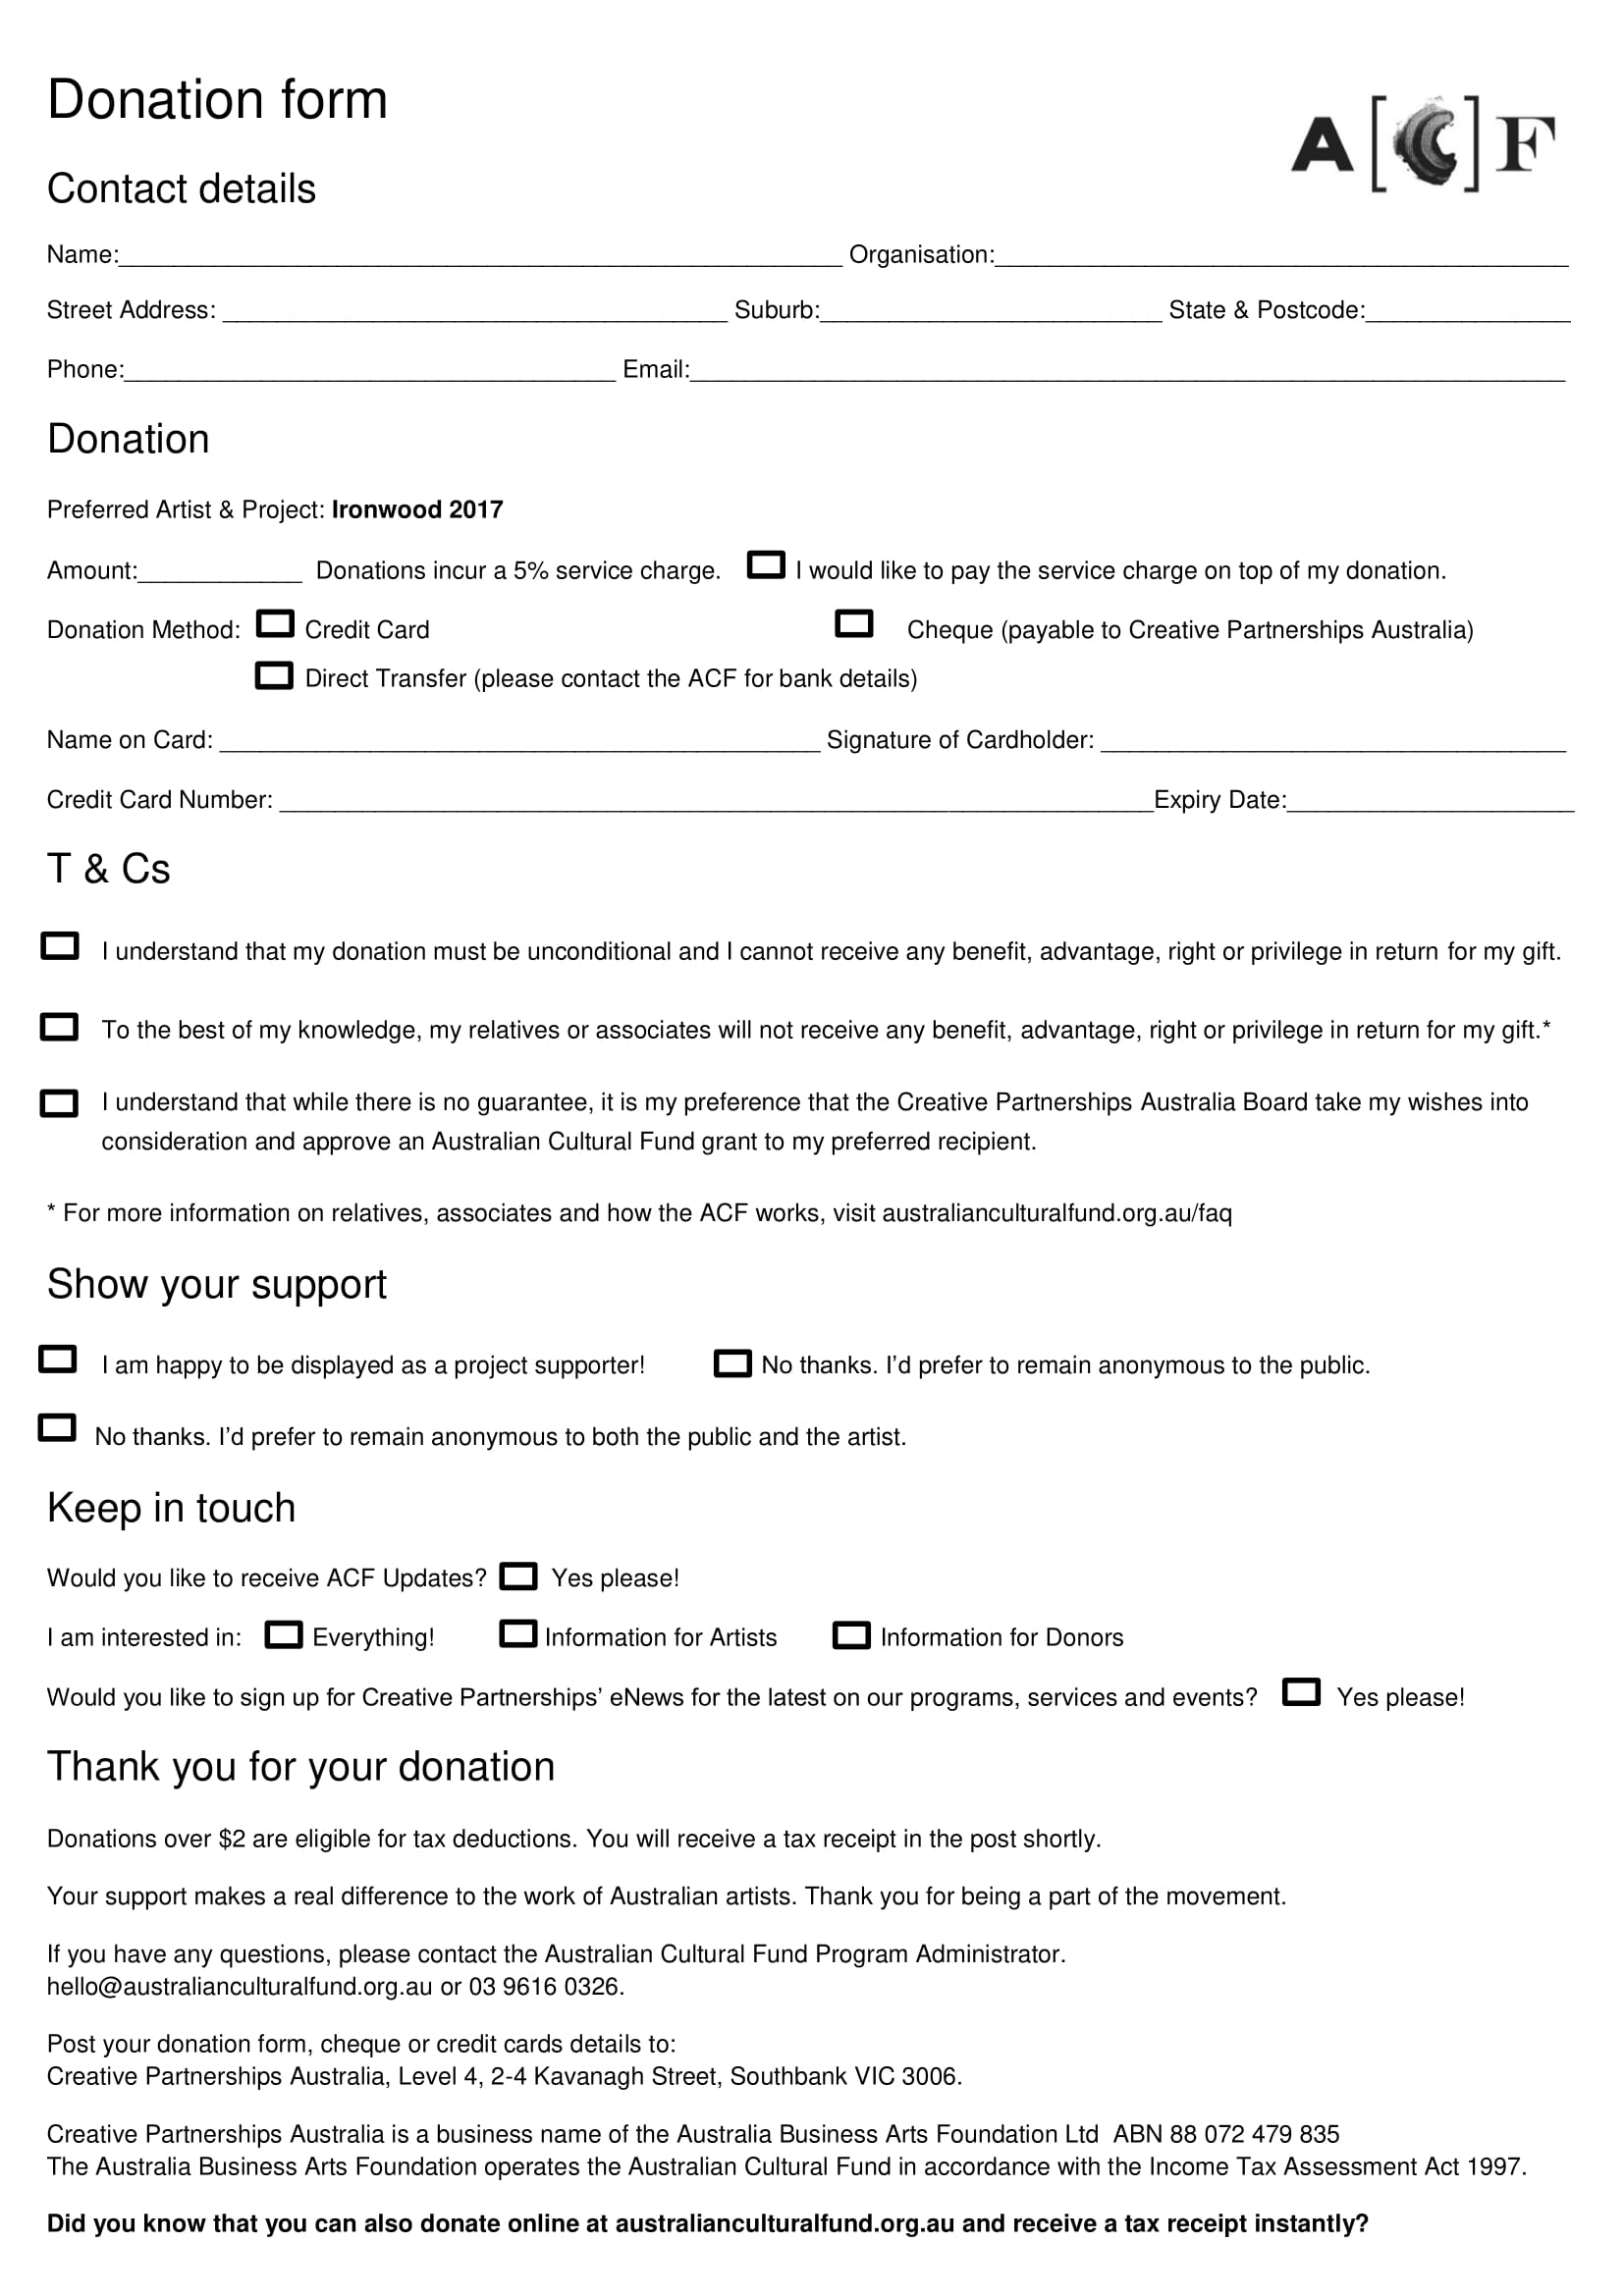 quick donation form sample 1